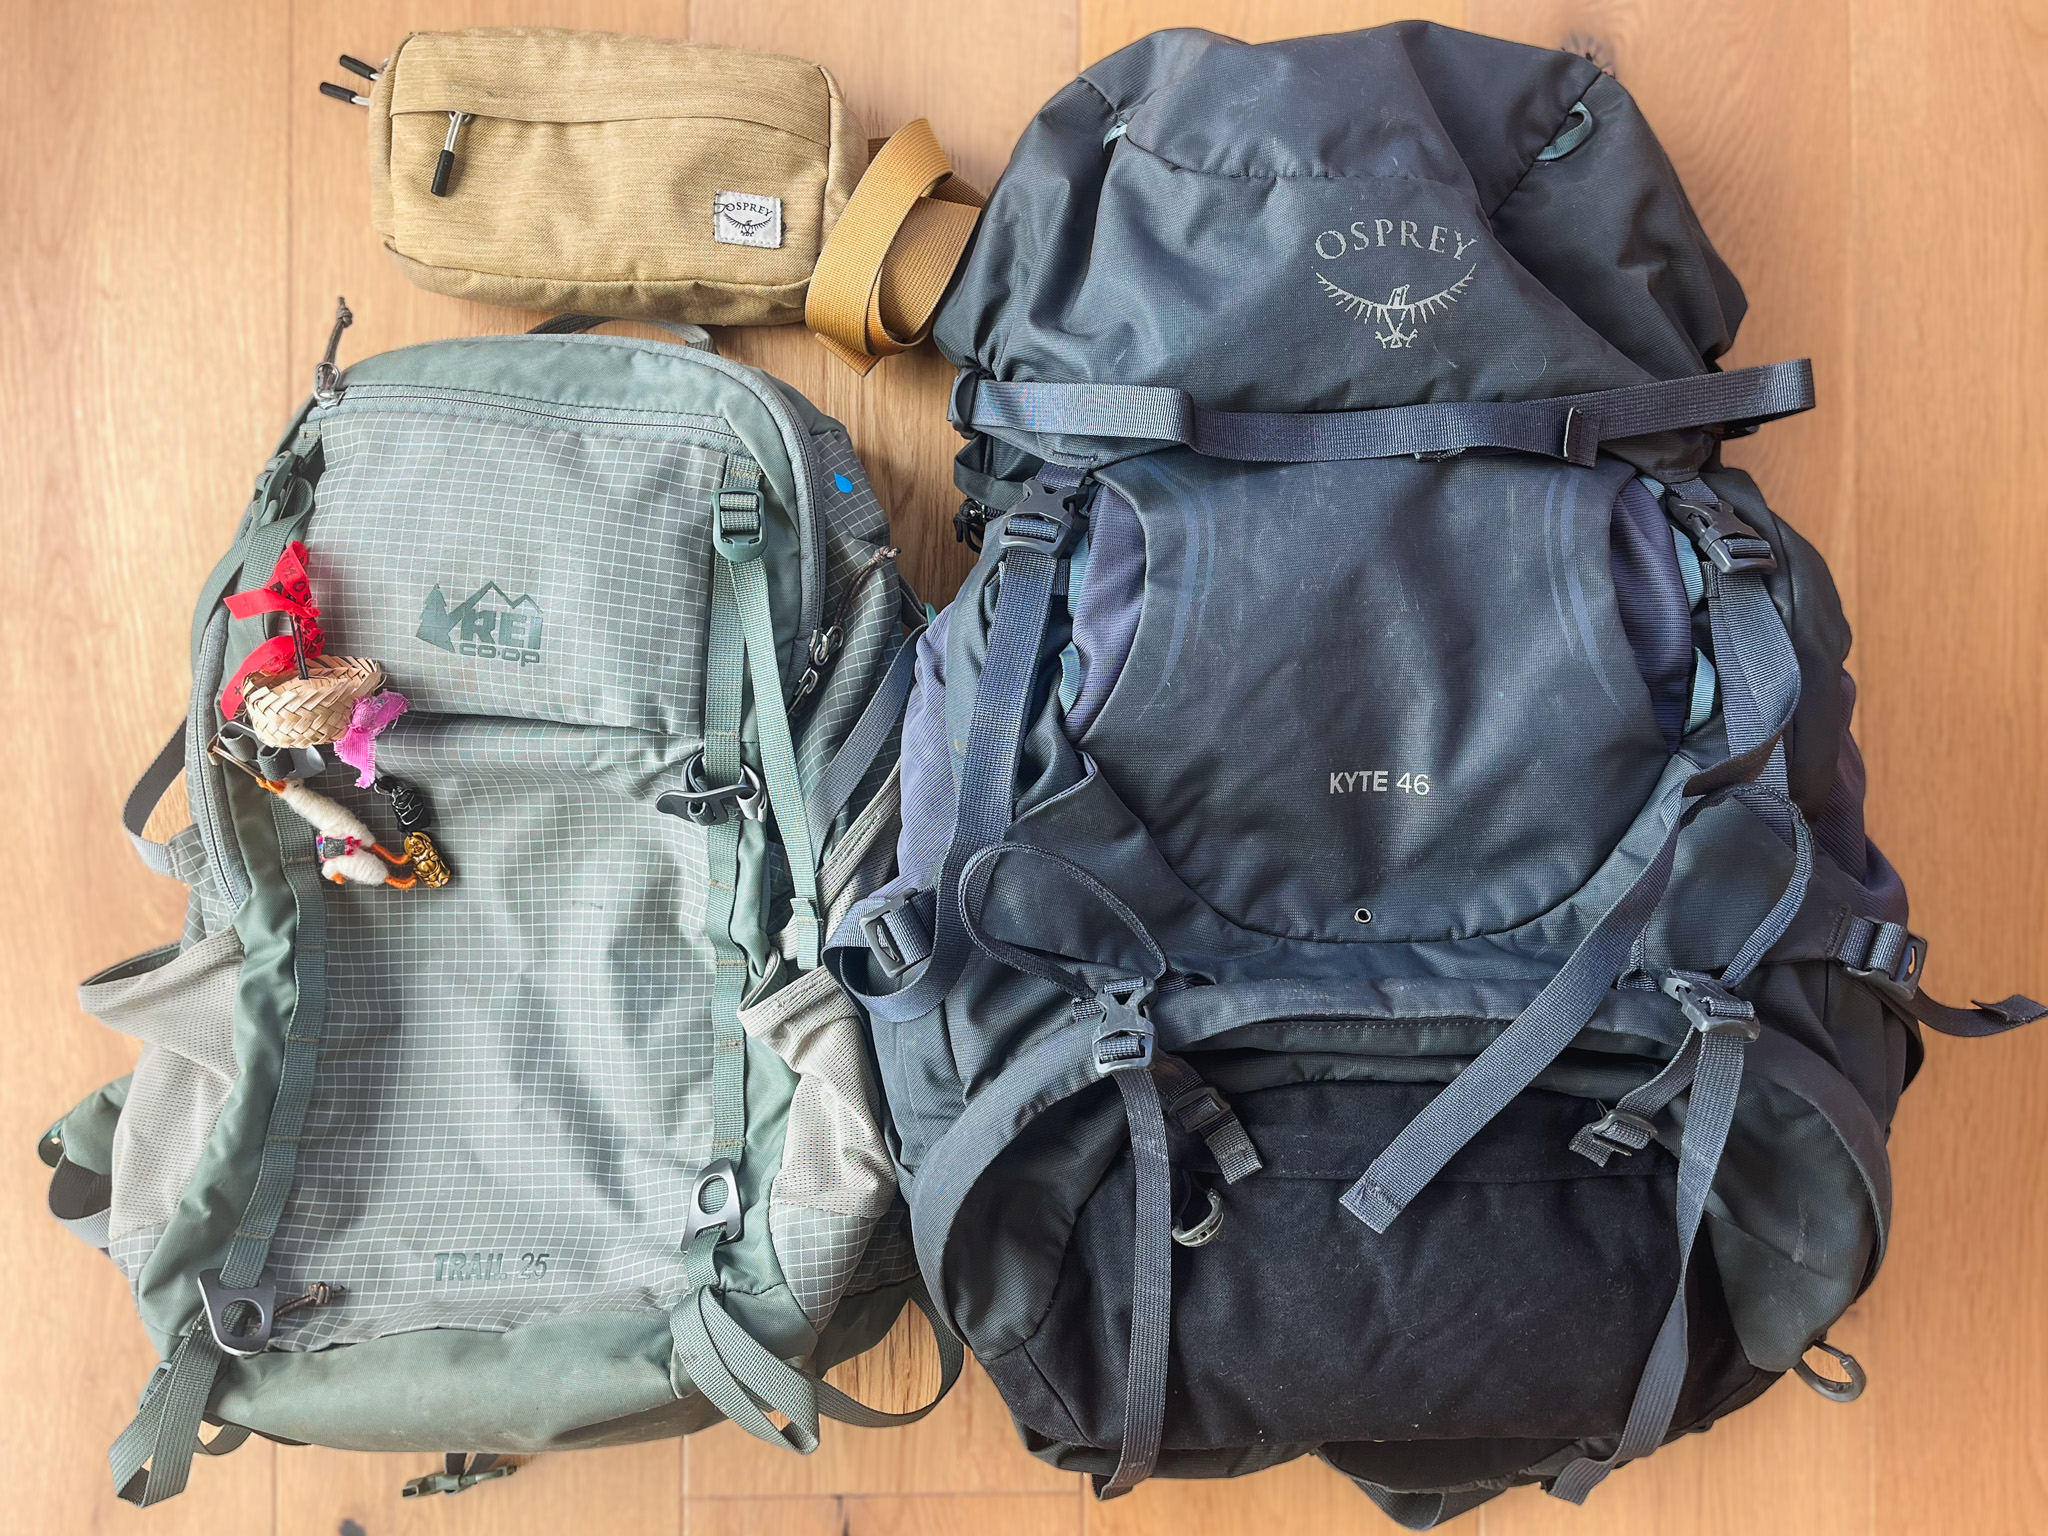 backpacks included in a packing list for long-term travel